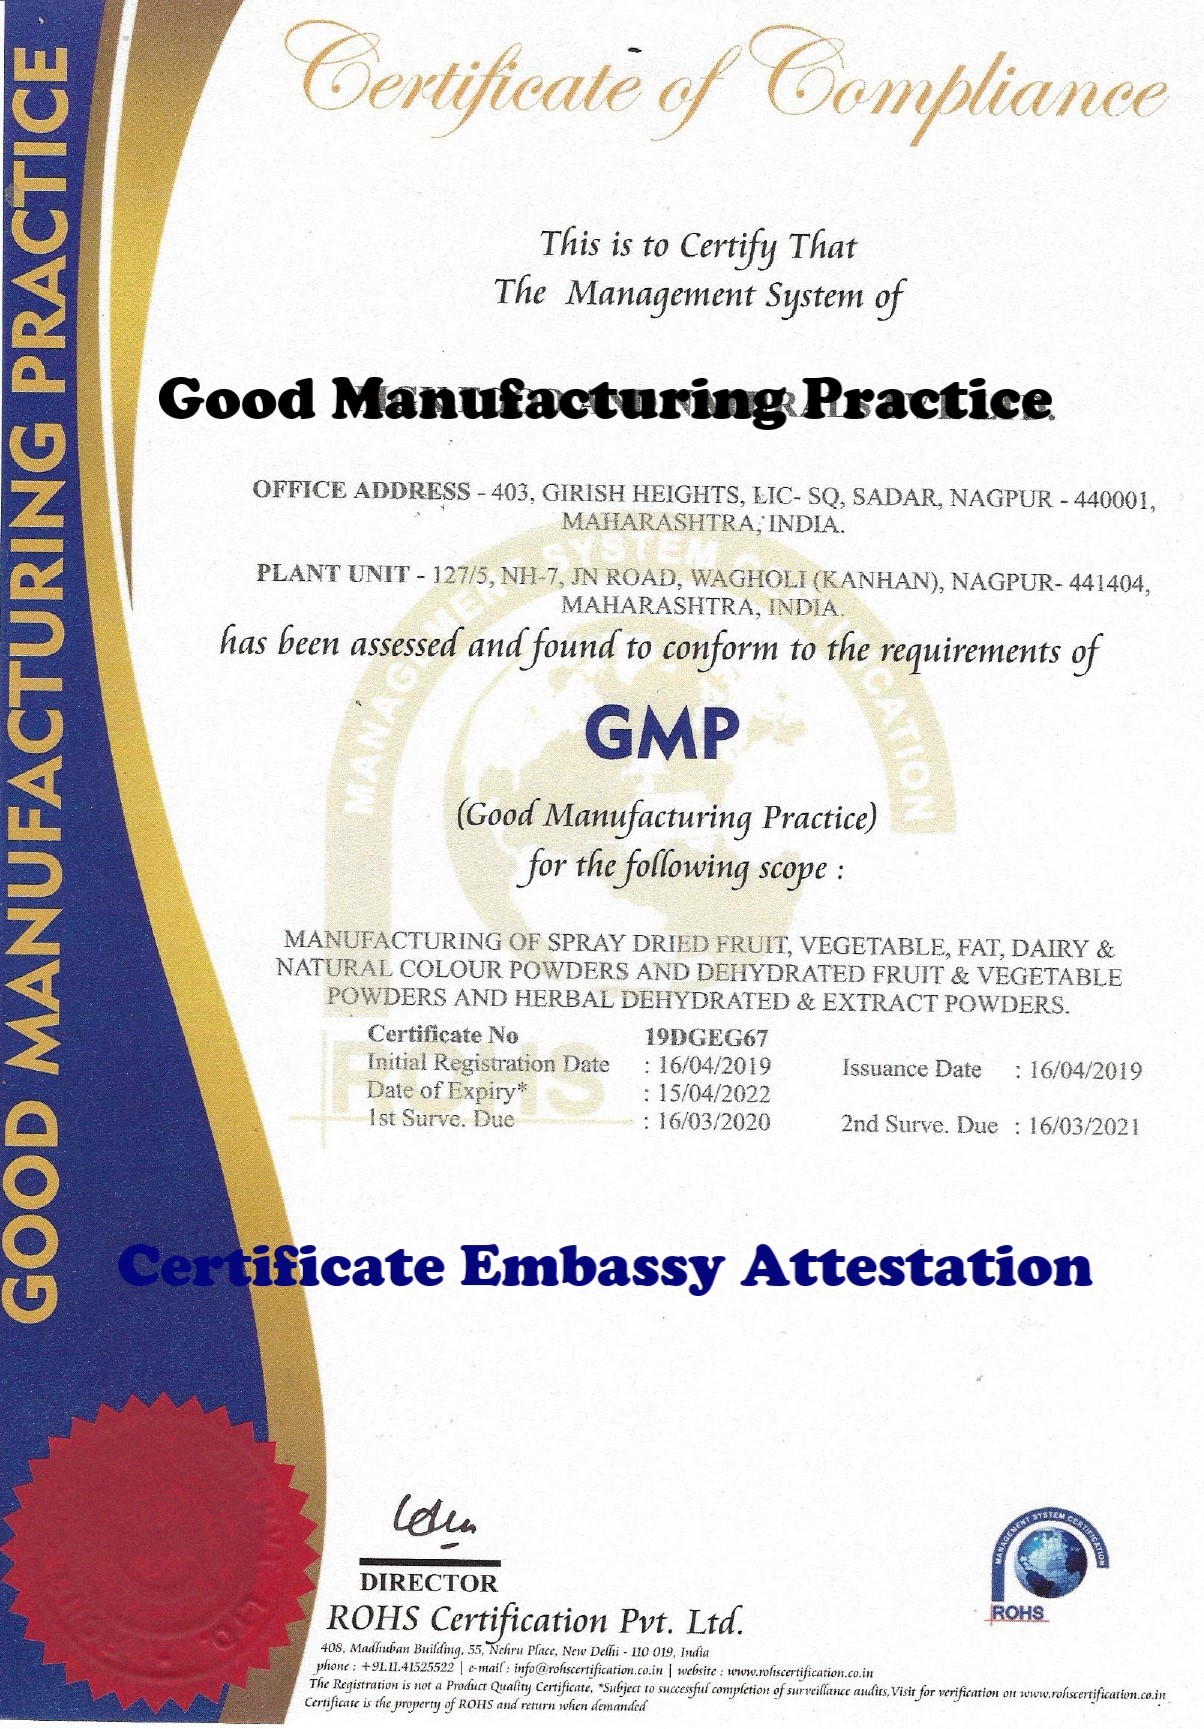 GMP Certificate Attestation from Sudan Embassy